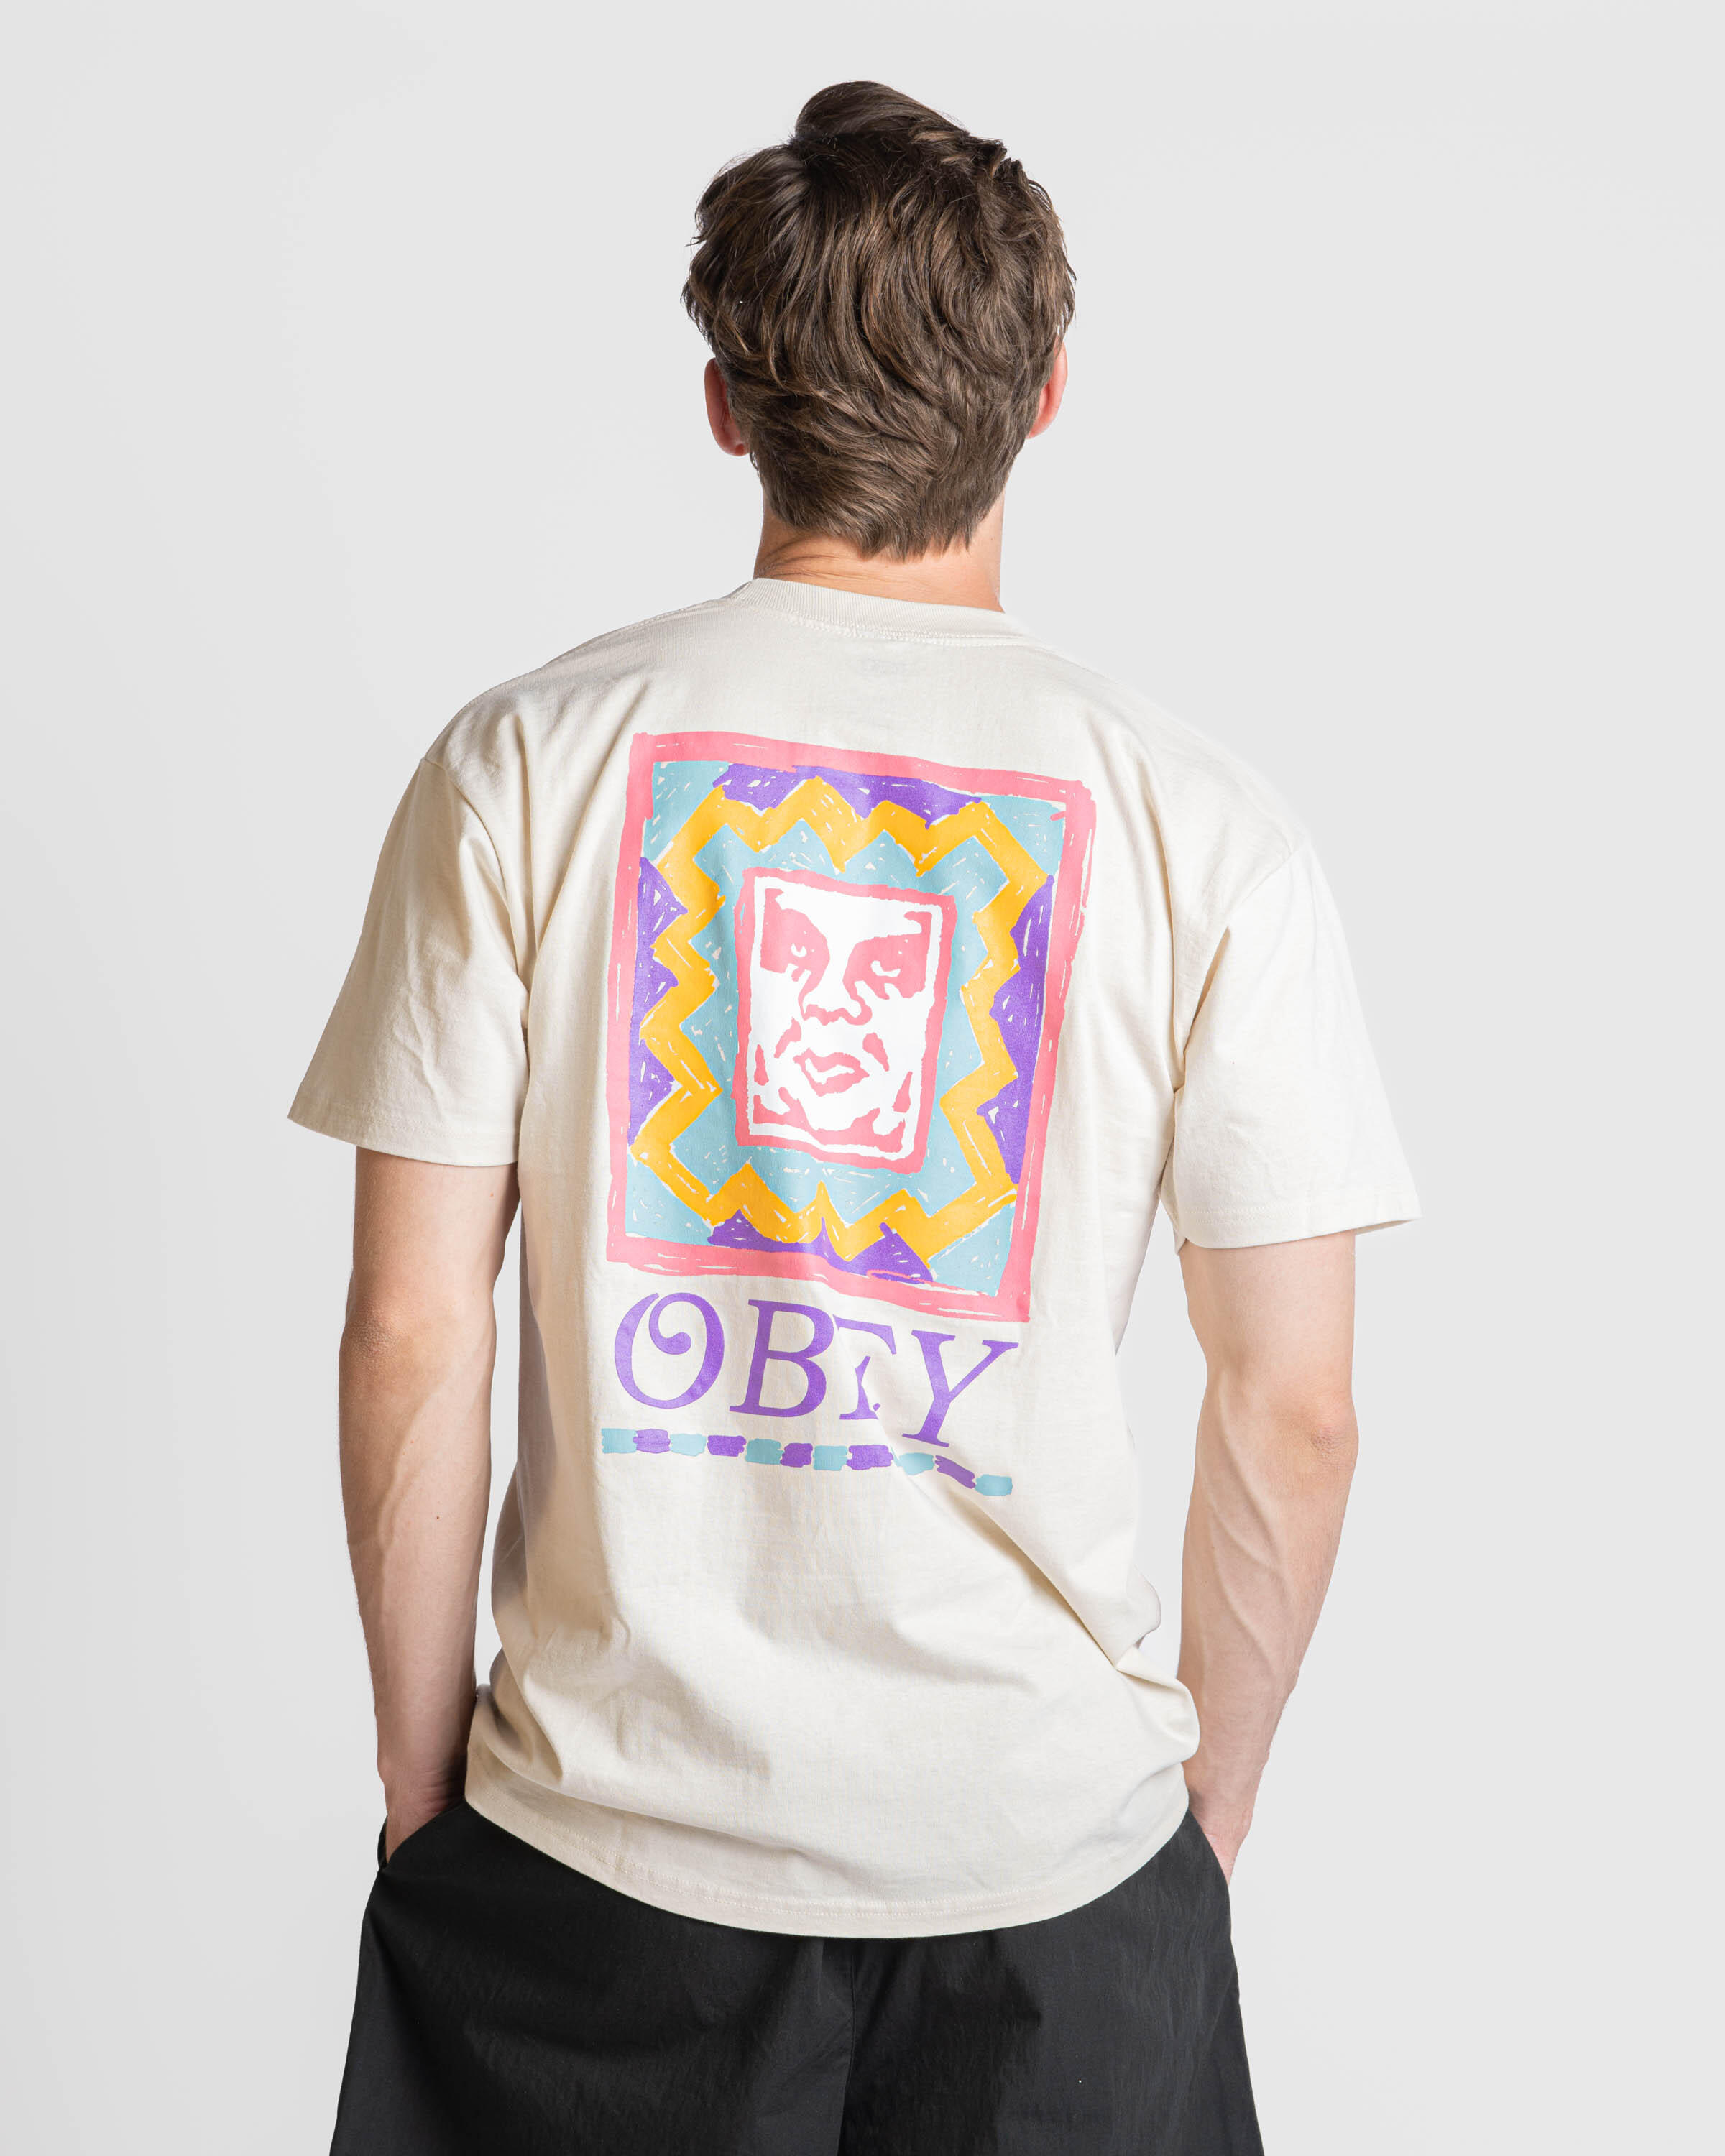 Obey throwback tee